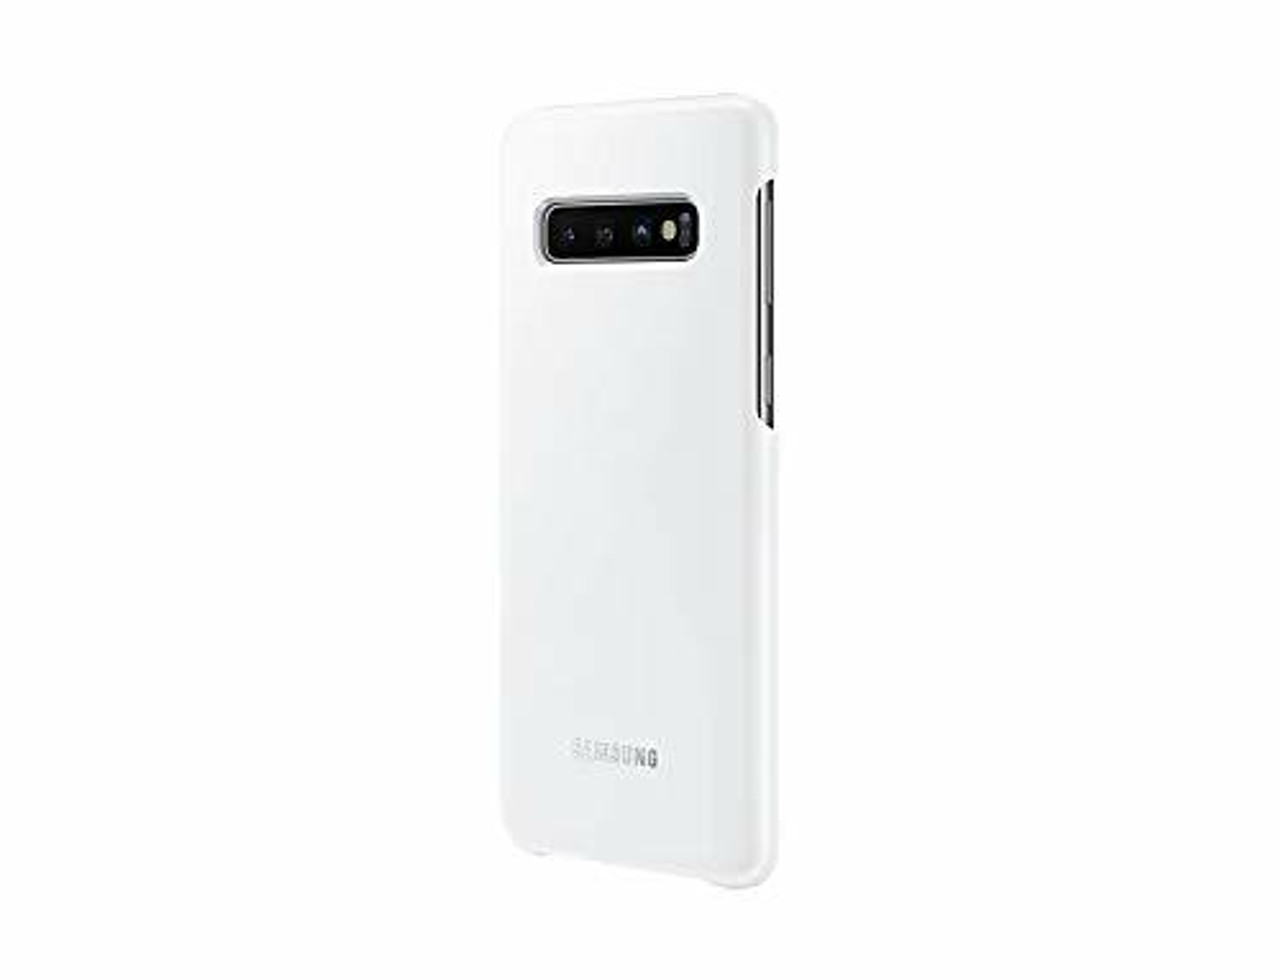 Galaxy S10 LED Cover - Black